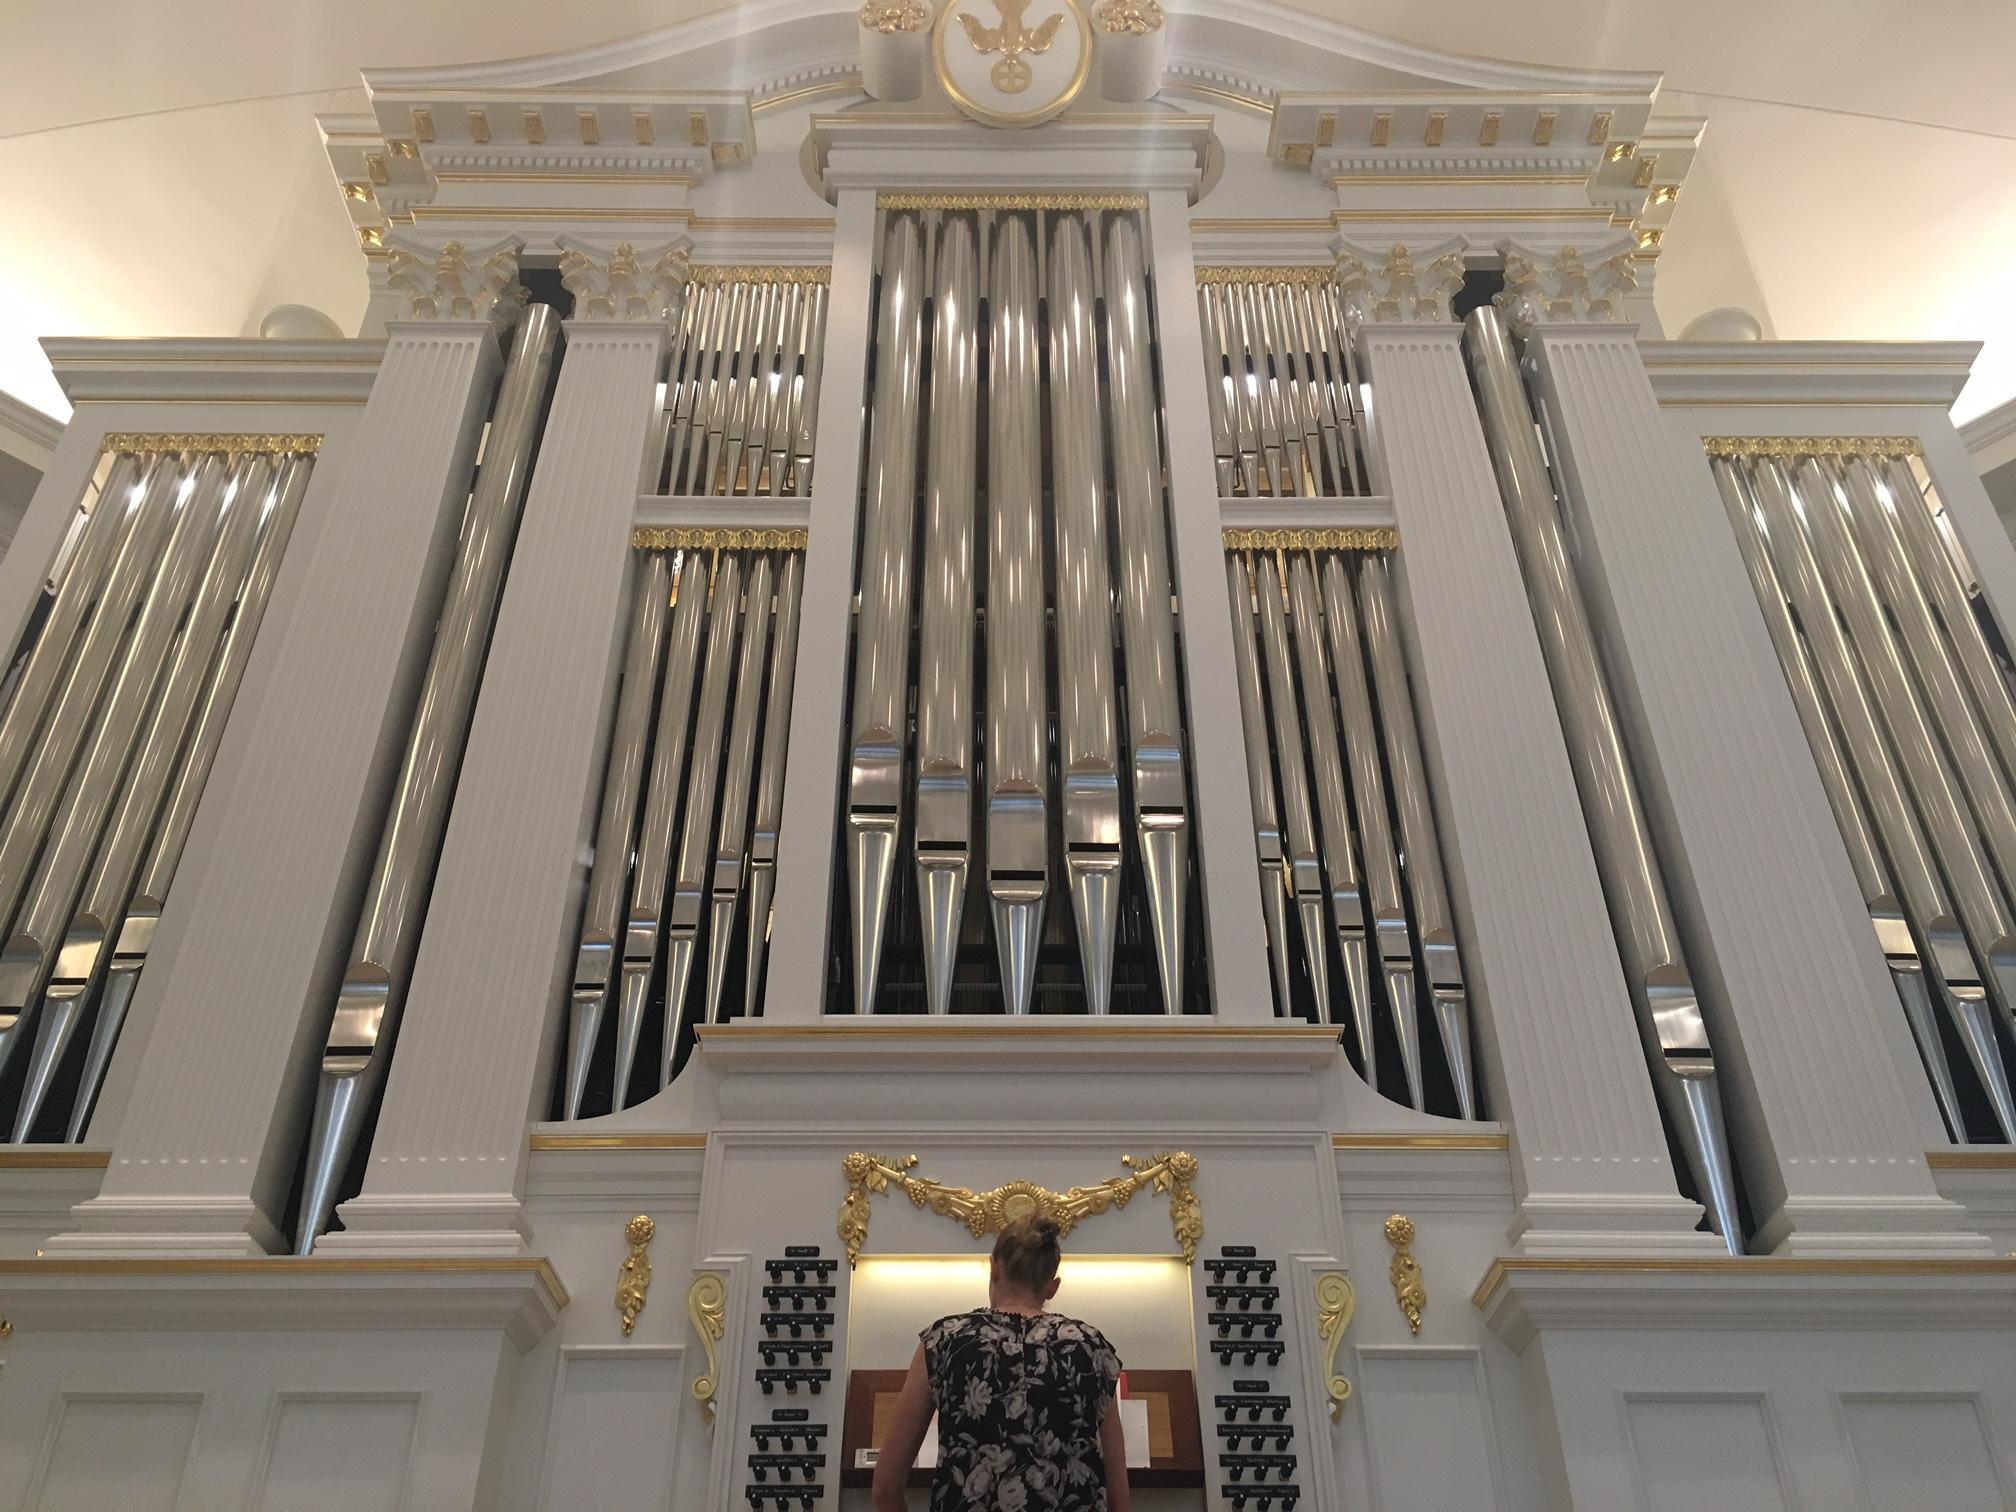 A New Prairie Village Pipe Organ Finds Its Voice | KCUR